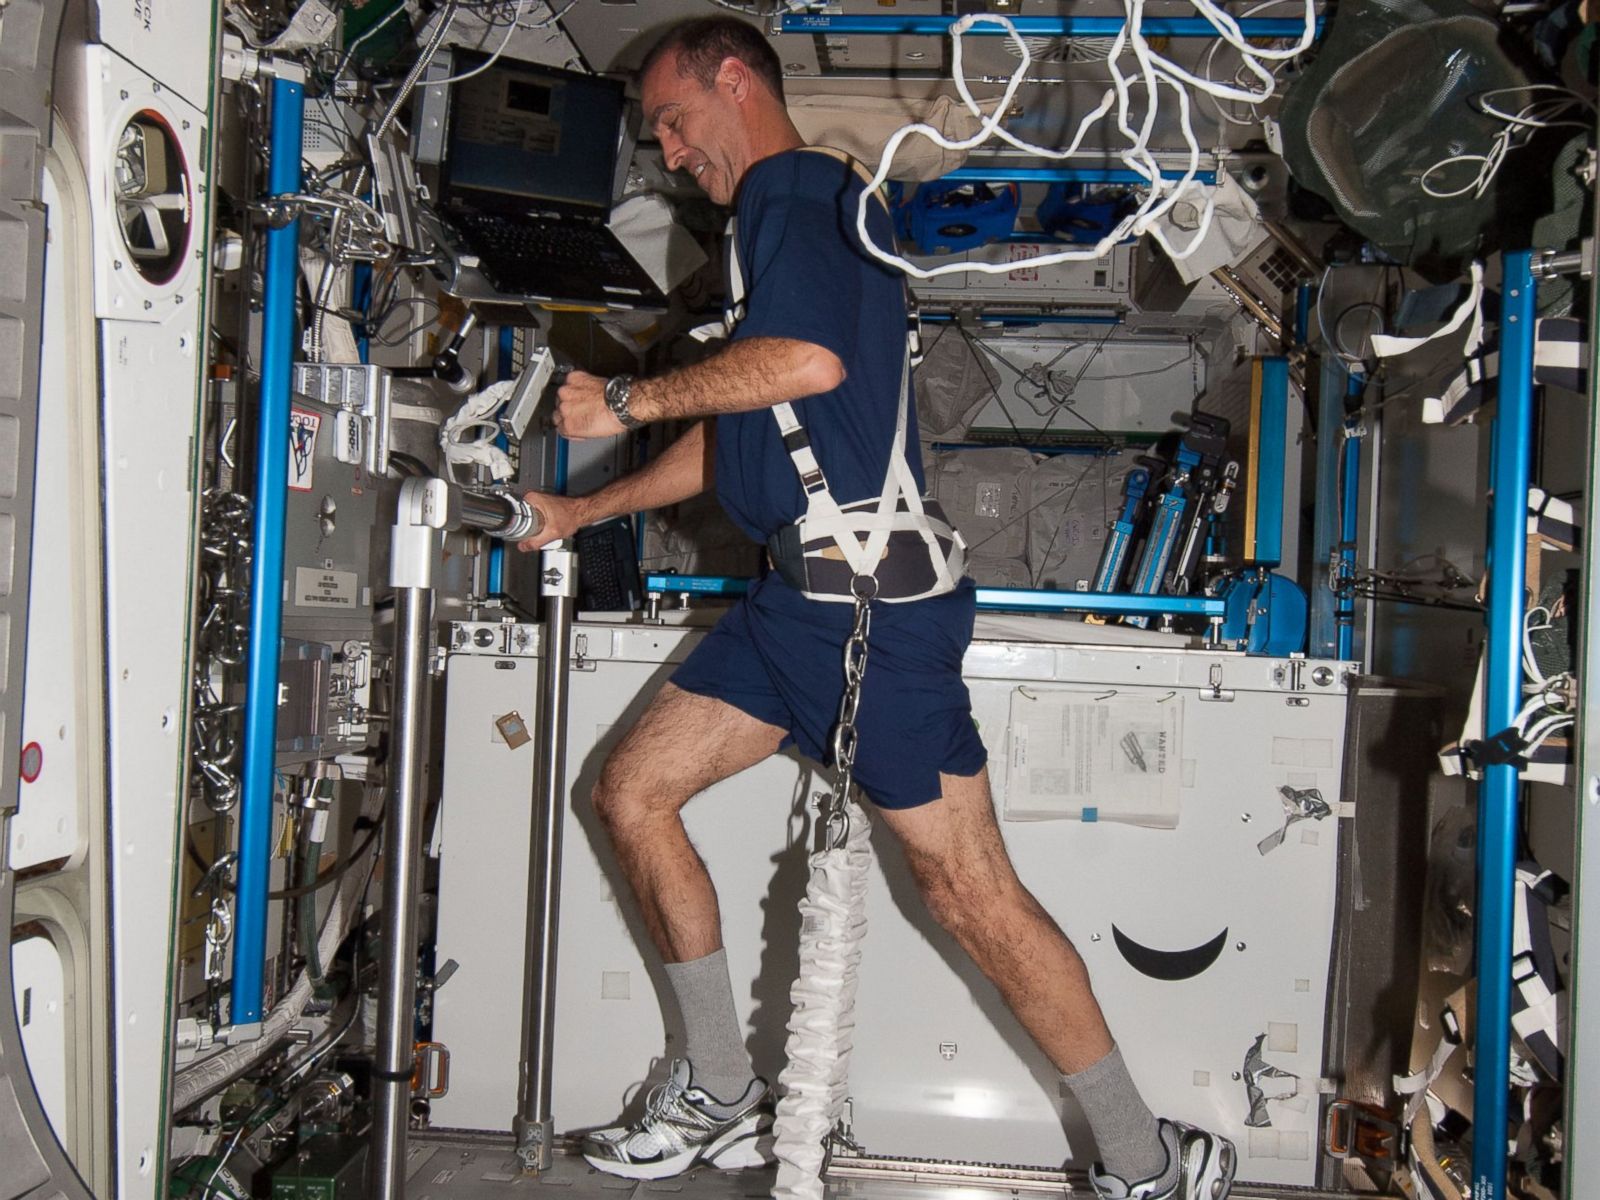 See What Life Is Like Inside The International Space Station